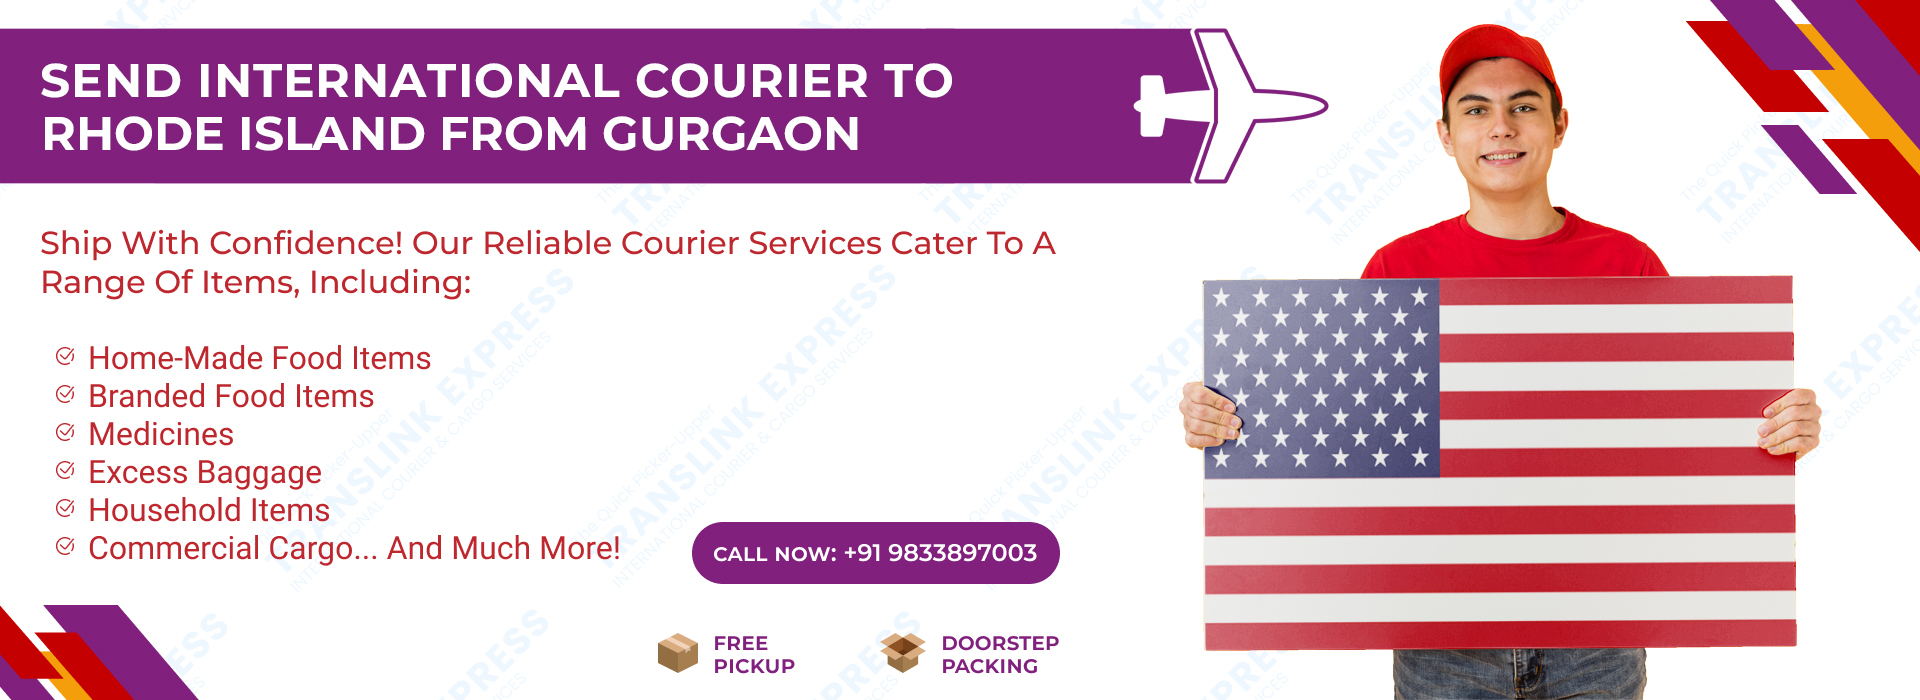 Courier to Rhode Island From Gurgaon